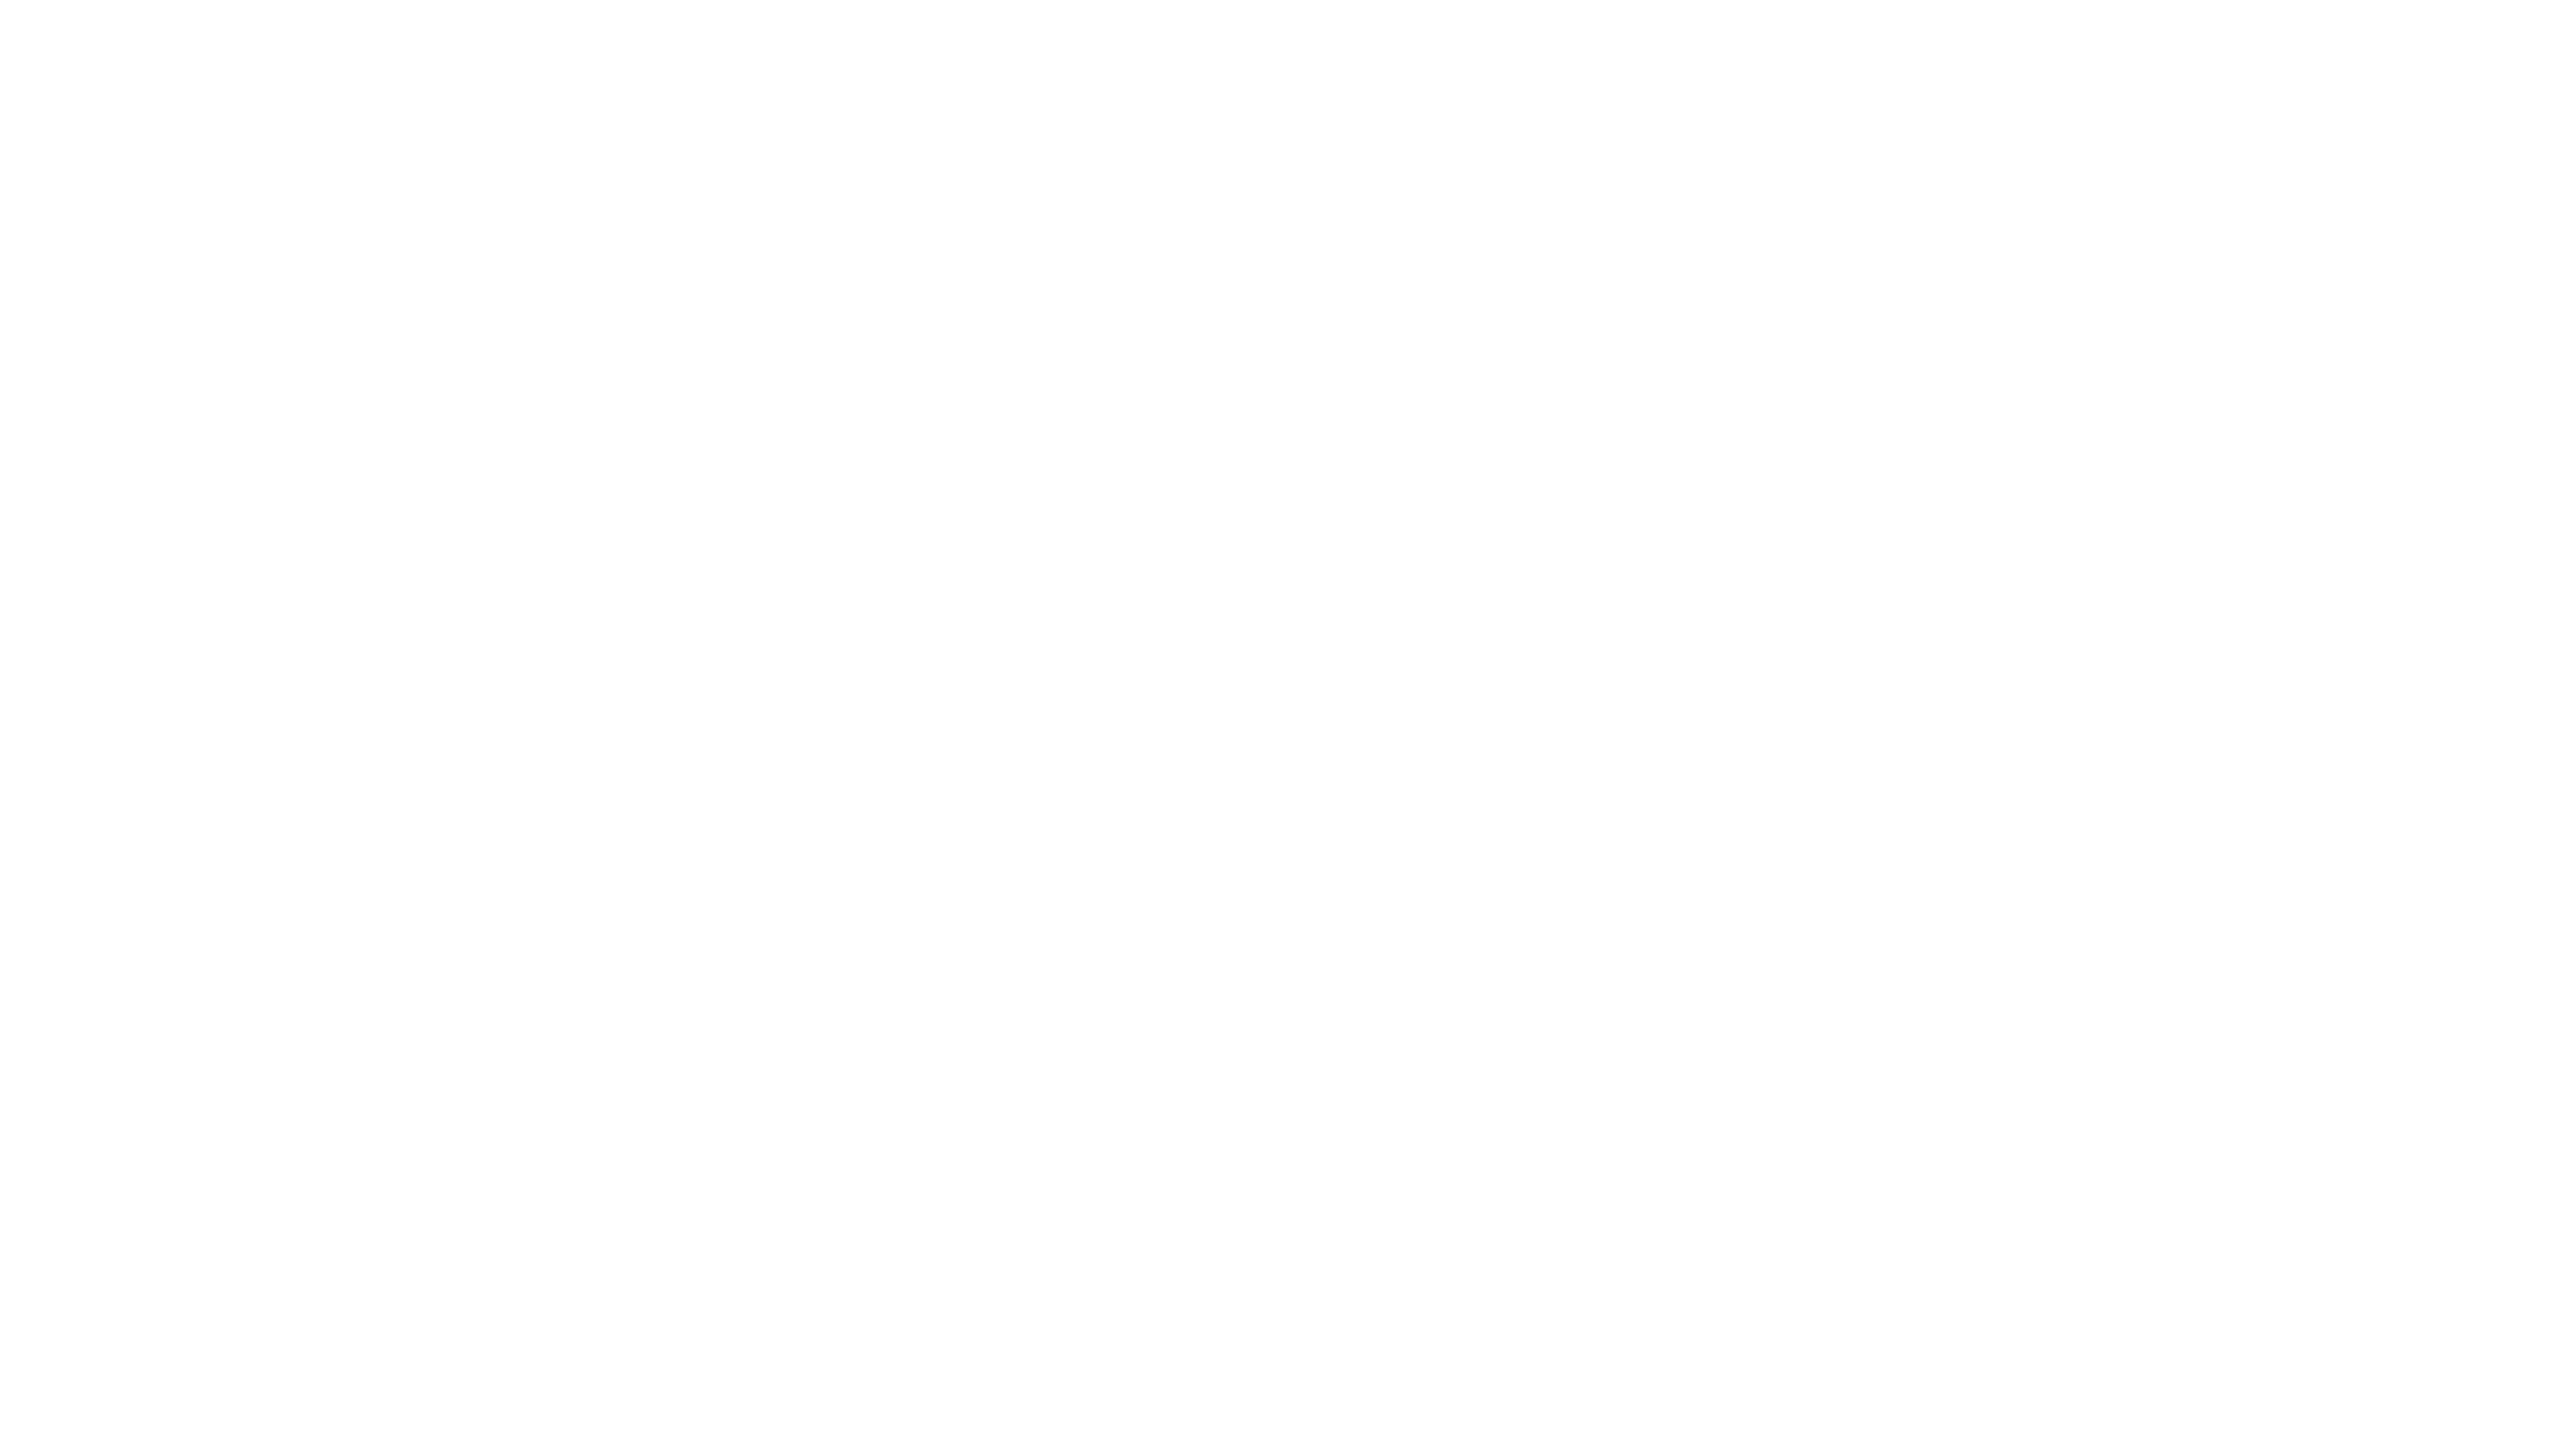 continental airlines logo